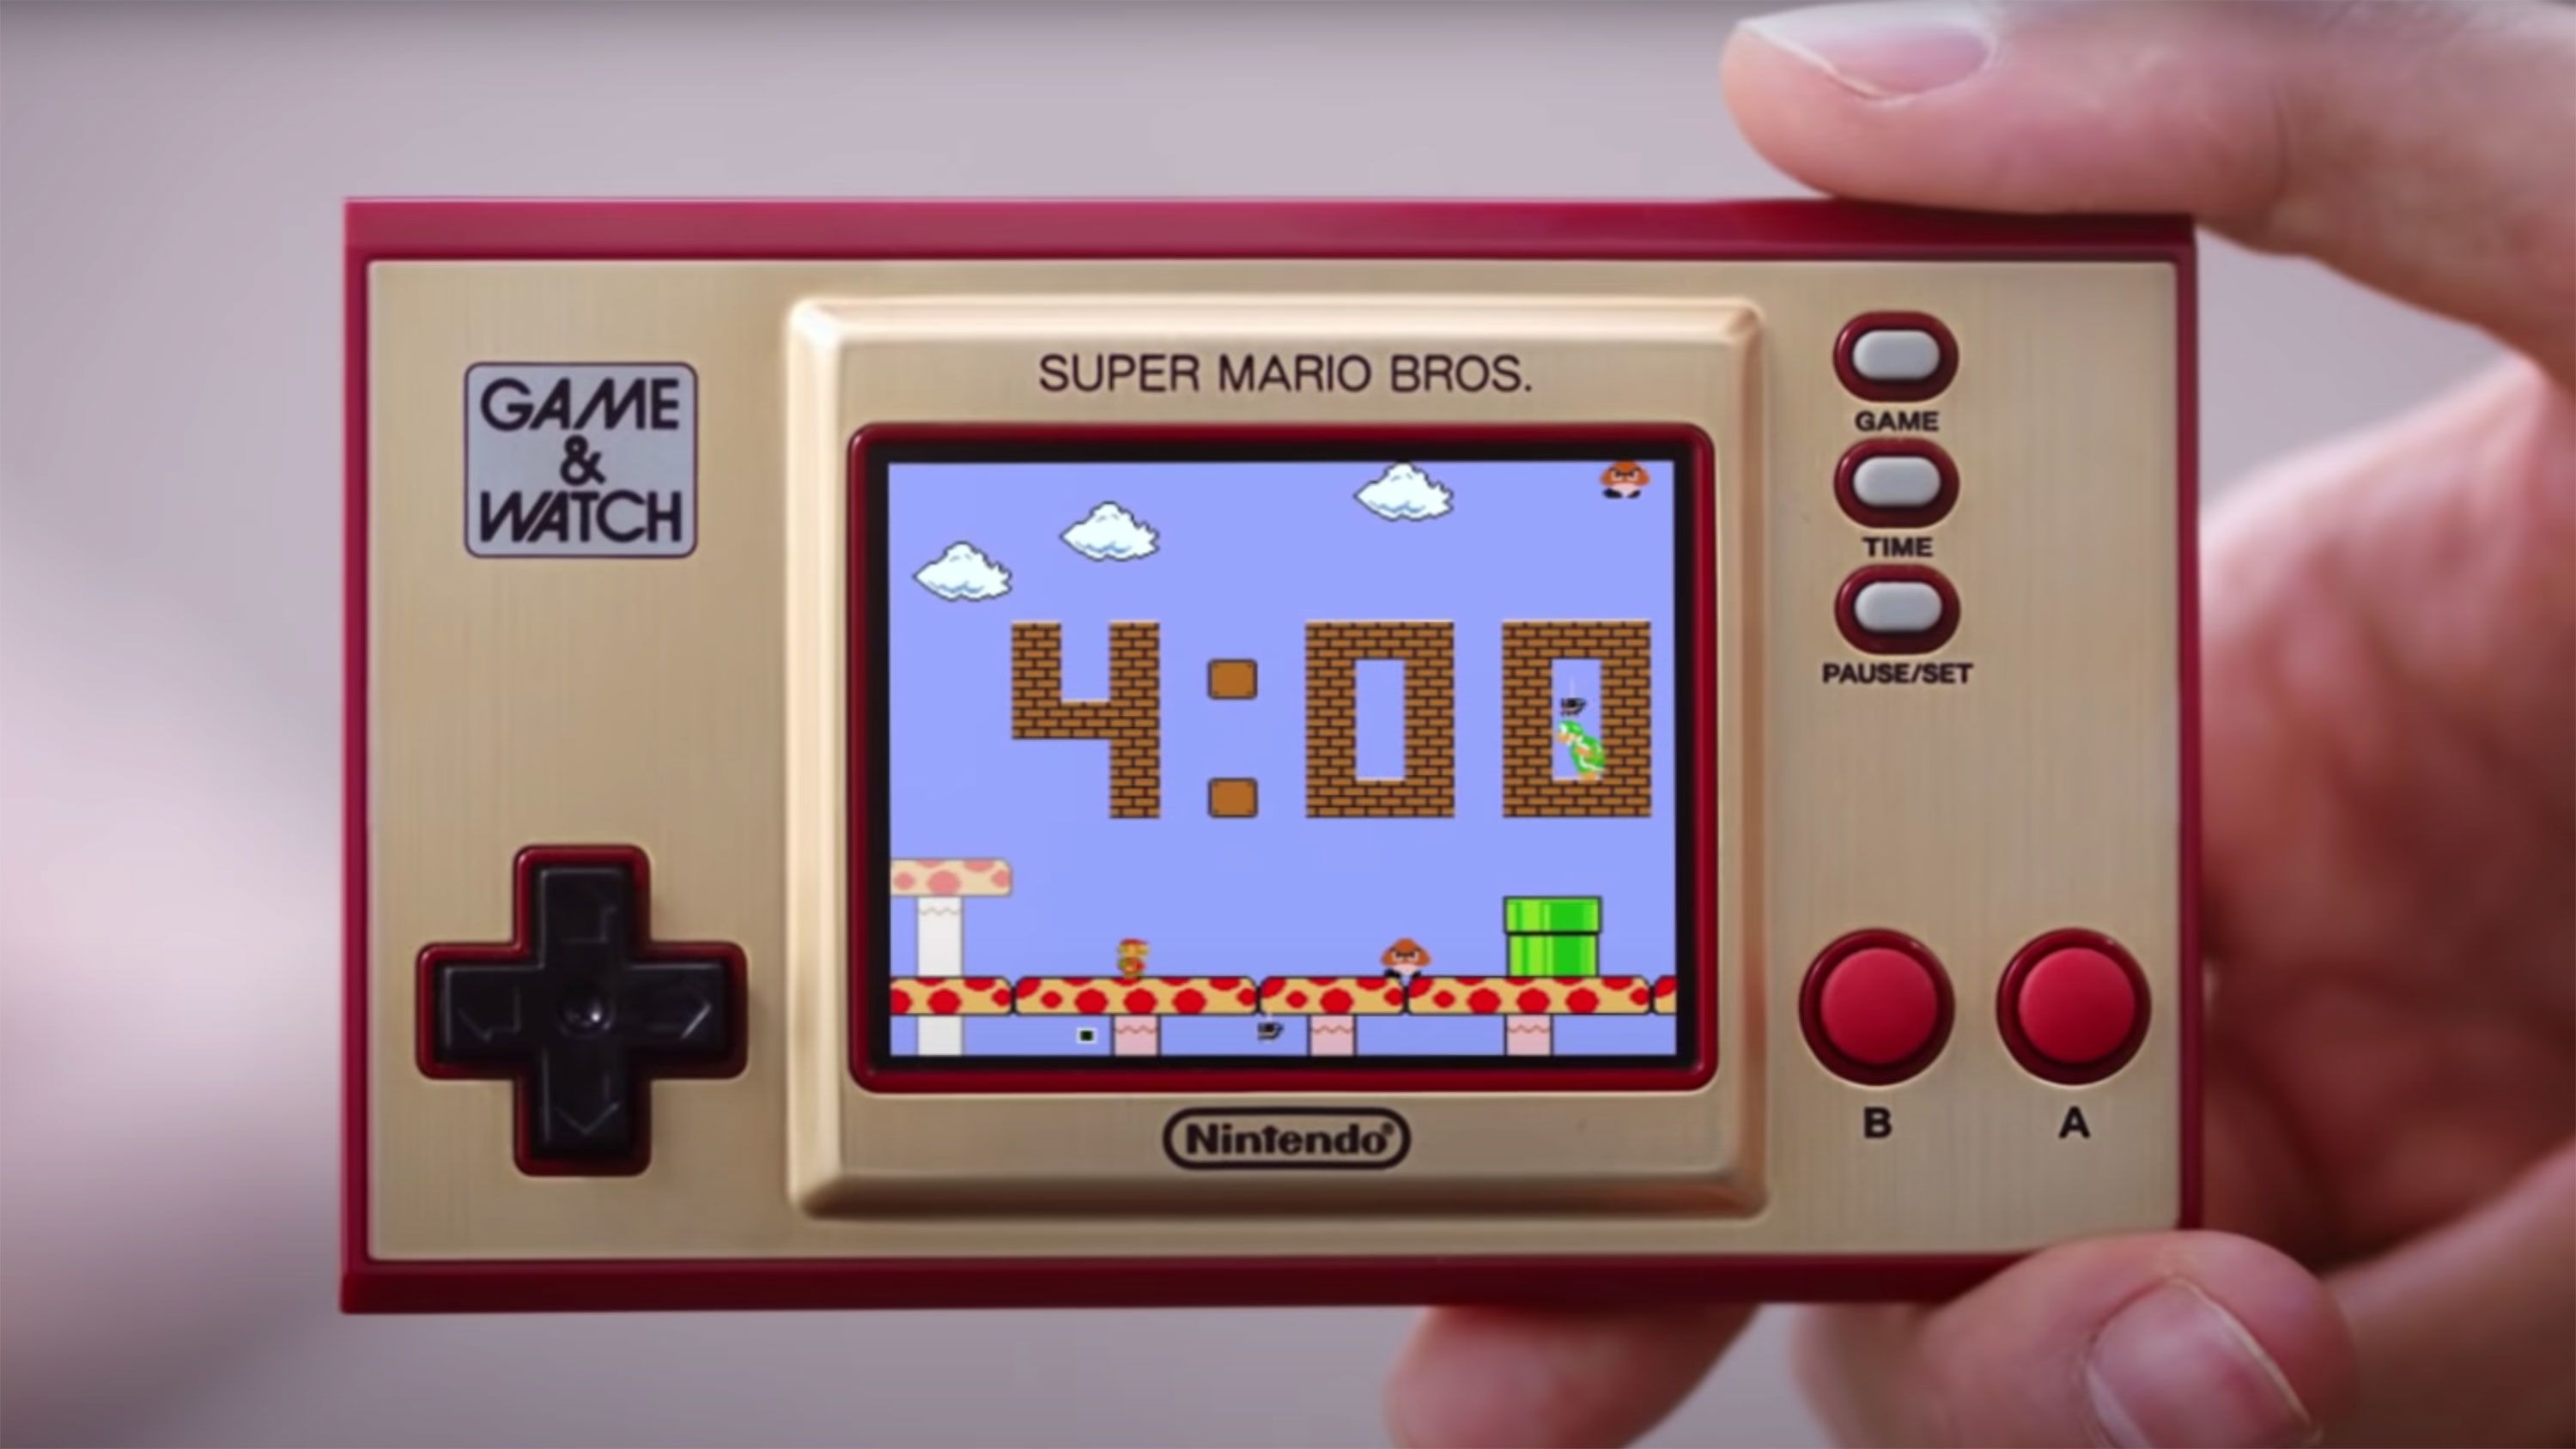 Nintendo is bringing back Game & Watch, a super-retro handheld from 1980s CNN Business